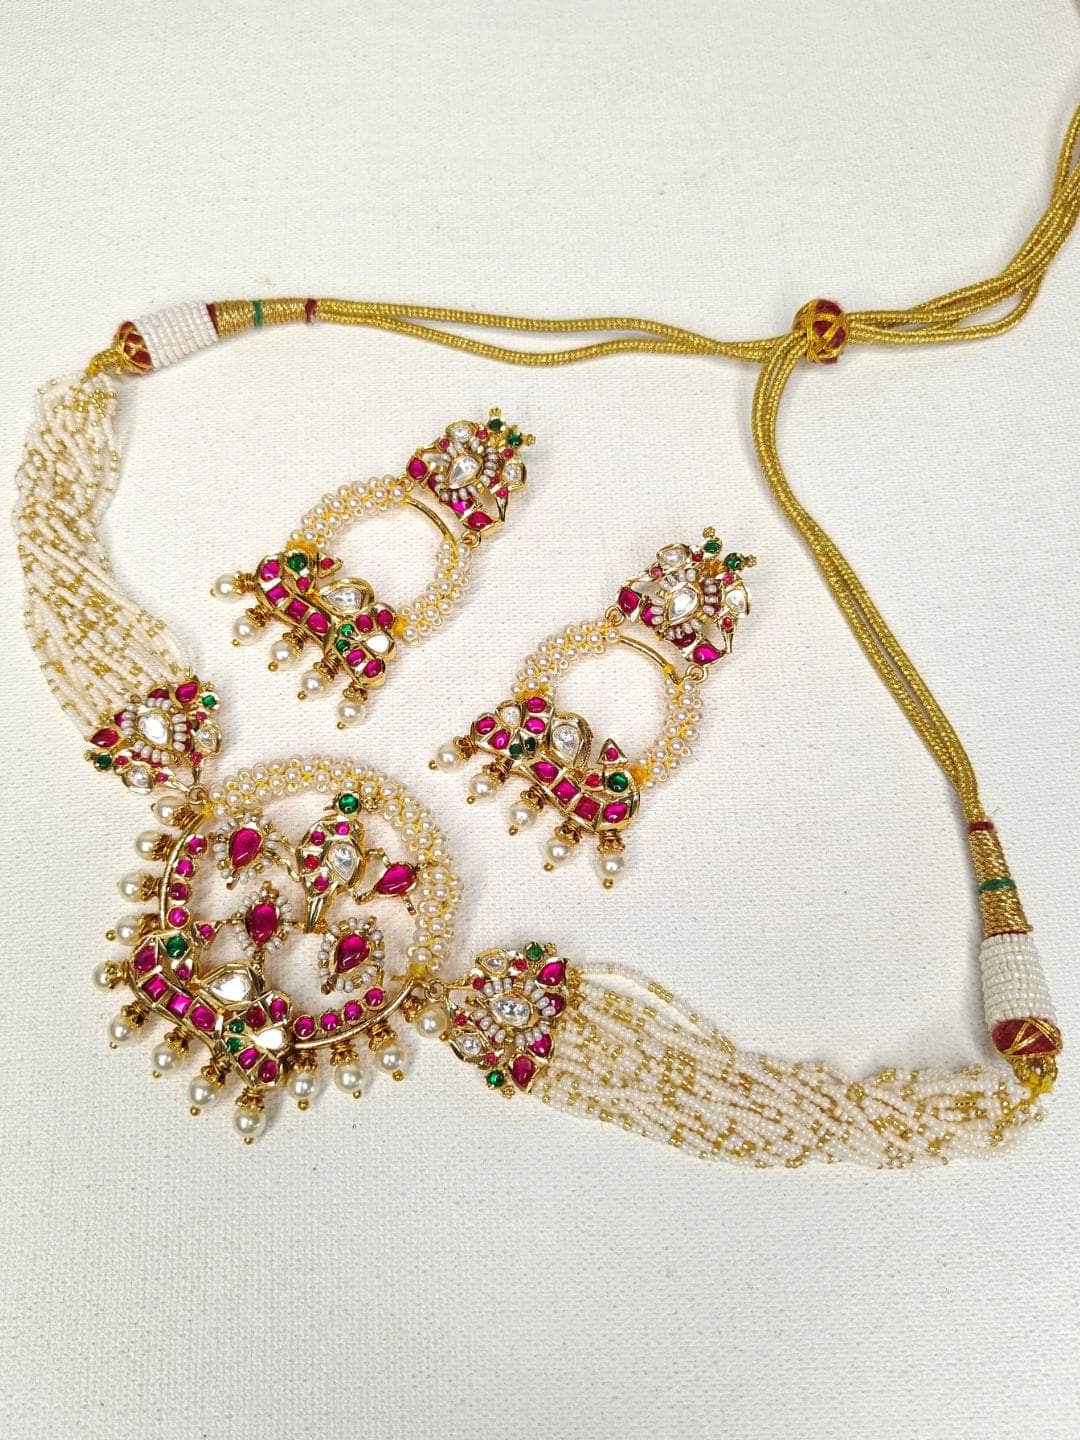 Ishhaara Dazzling AD choker Necklace and earring set